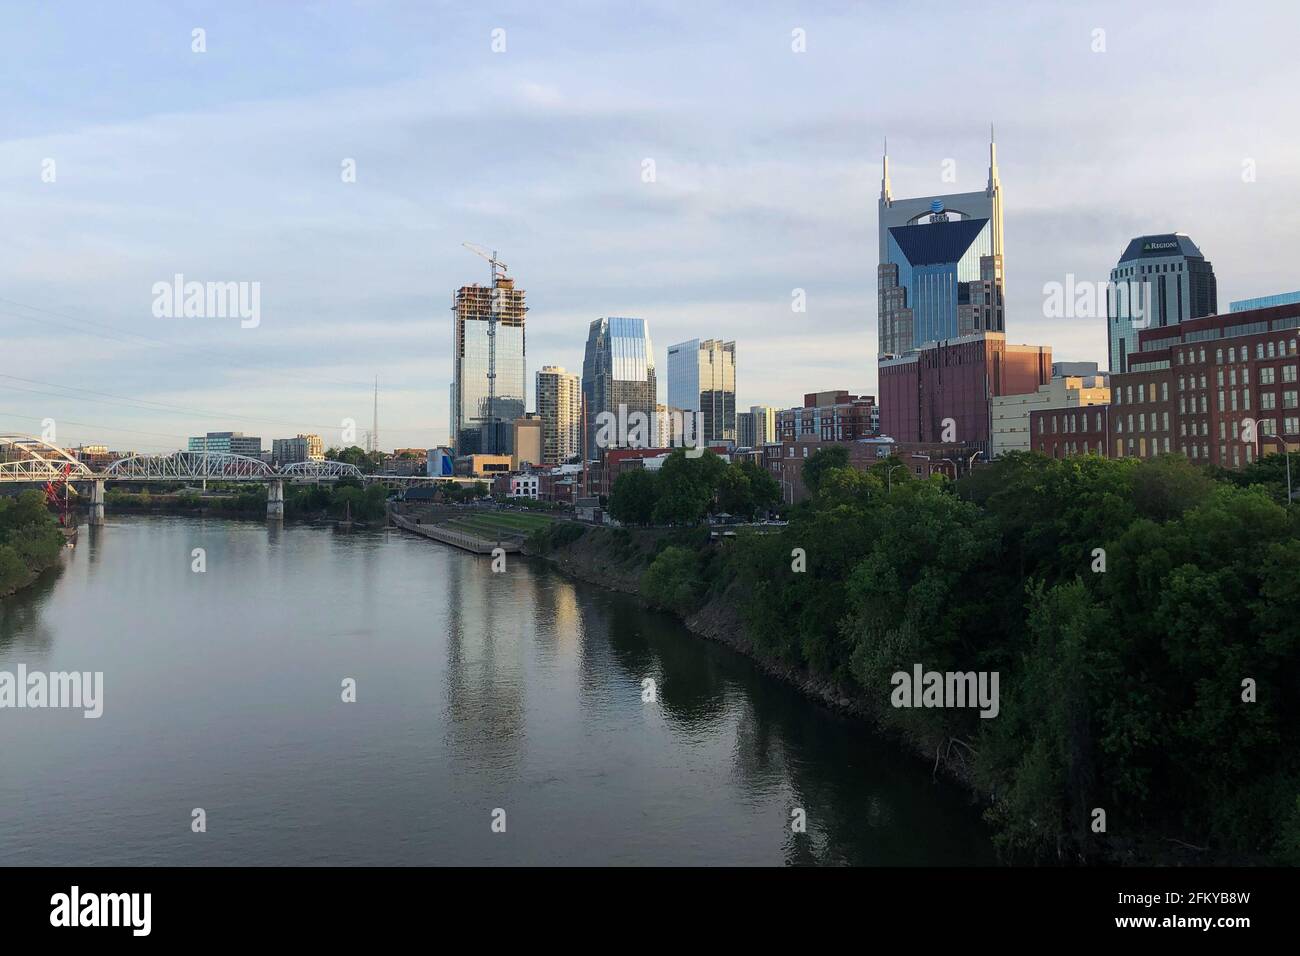 Nashville, United States. 01st May, 2021. Nashville, located along the Cumberland River, is Tennessee's capital and largest city. It is home to Vanderbilt University and the Grand Ole Opry House. May 1, 2021. (Photo by Samuel Rigelhaupt/Sipa USA) Credit: Sipa USA/Alamy Live News Stock Photo